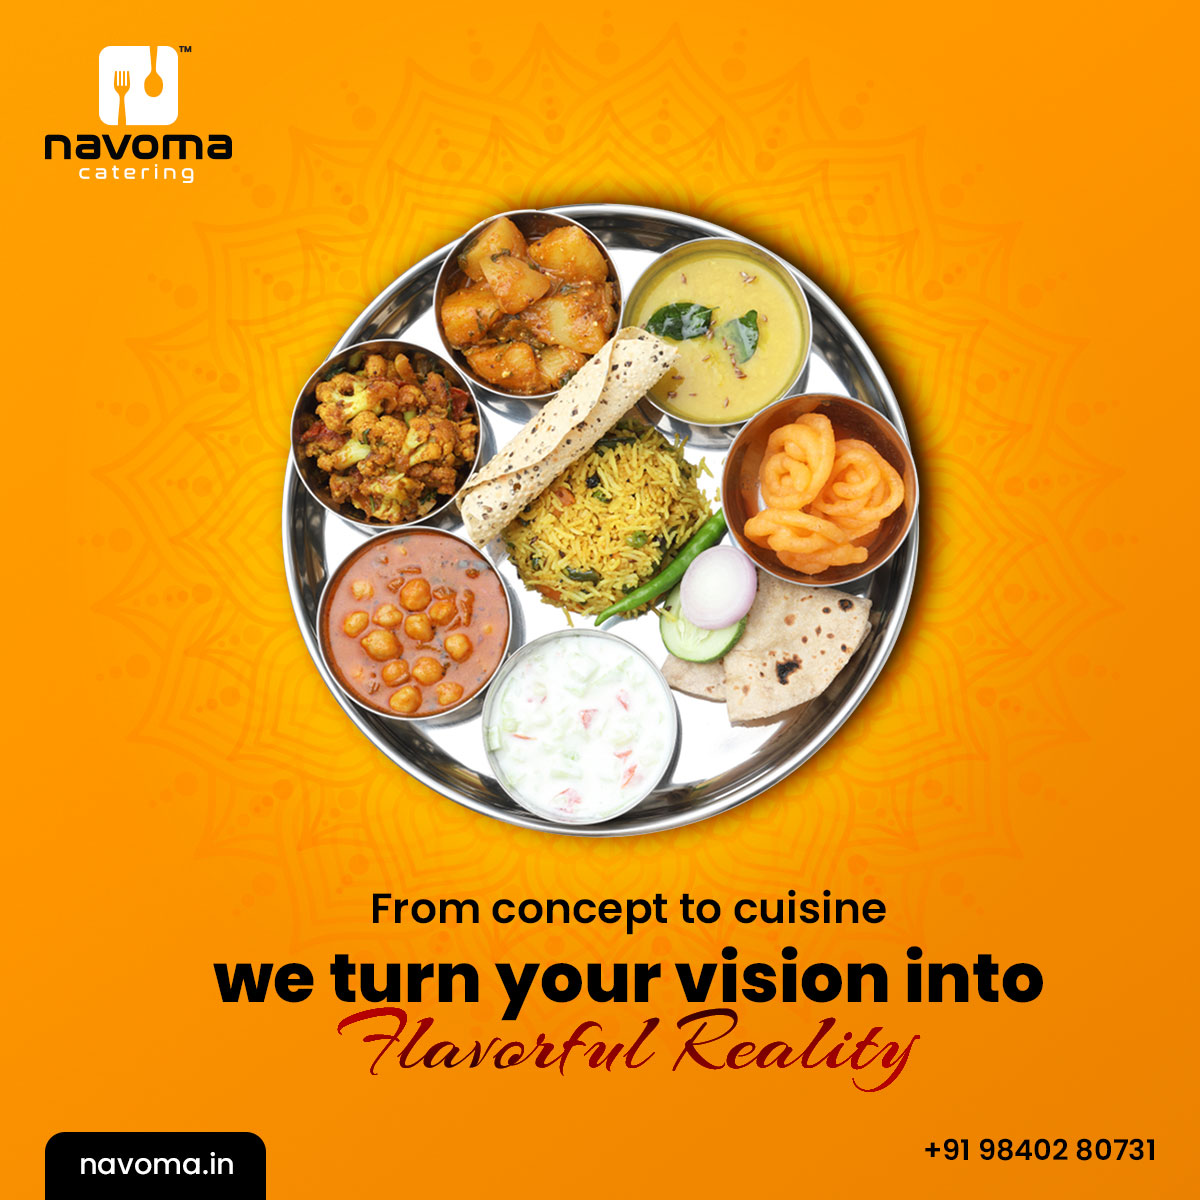 At Navoma Catering, we specialize in turning your culinary visions into a flavorful reality. 

Reach out to us at +91 98402 80731 for inquiries or visit navoma.in.

#NavomaCatering #CulinaryMagic #ExquisiteFlavors #QualityCuisine #UnmatchedTaste #EventCulinary #Food